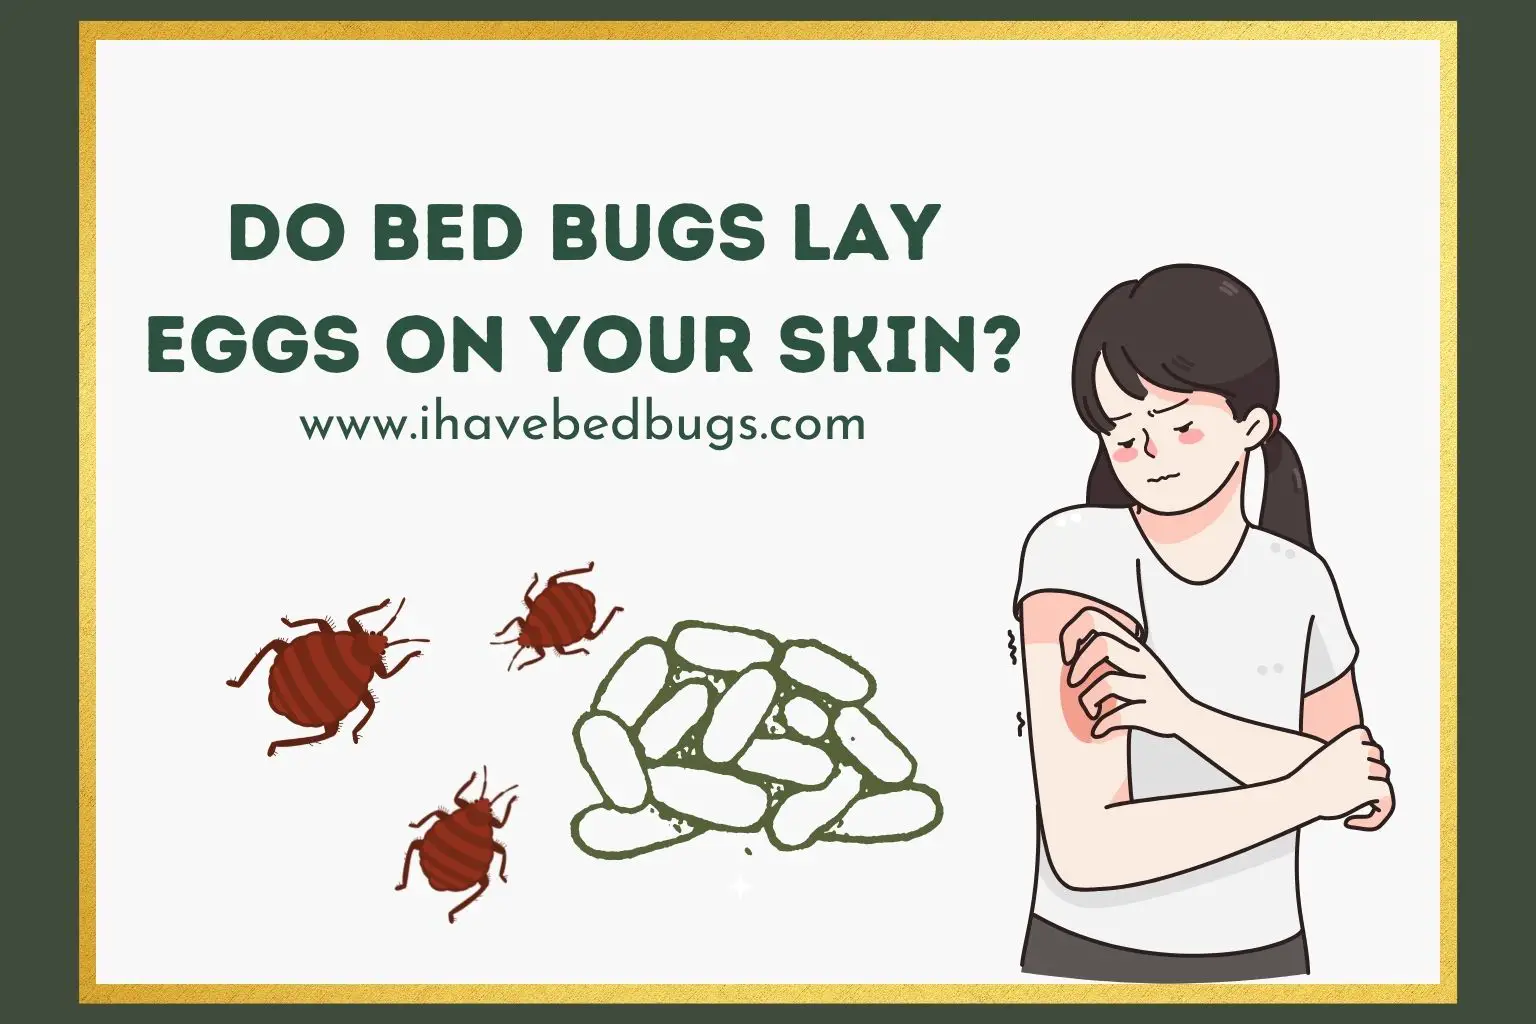 Do bed bugs lay eggs on your skin